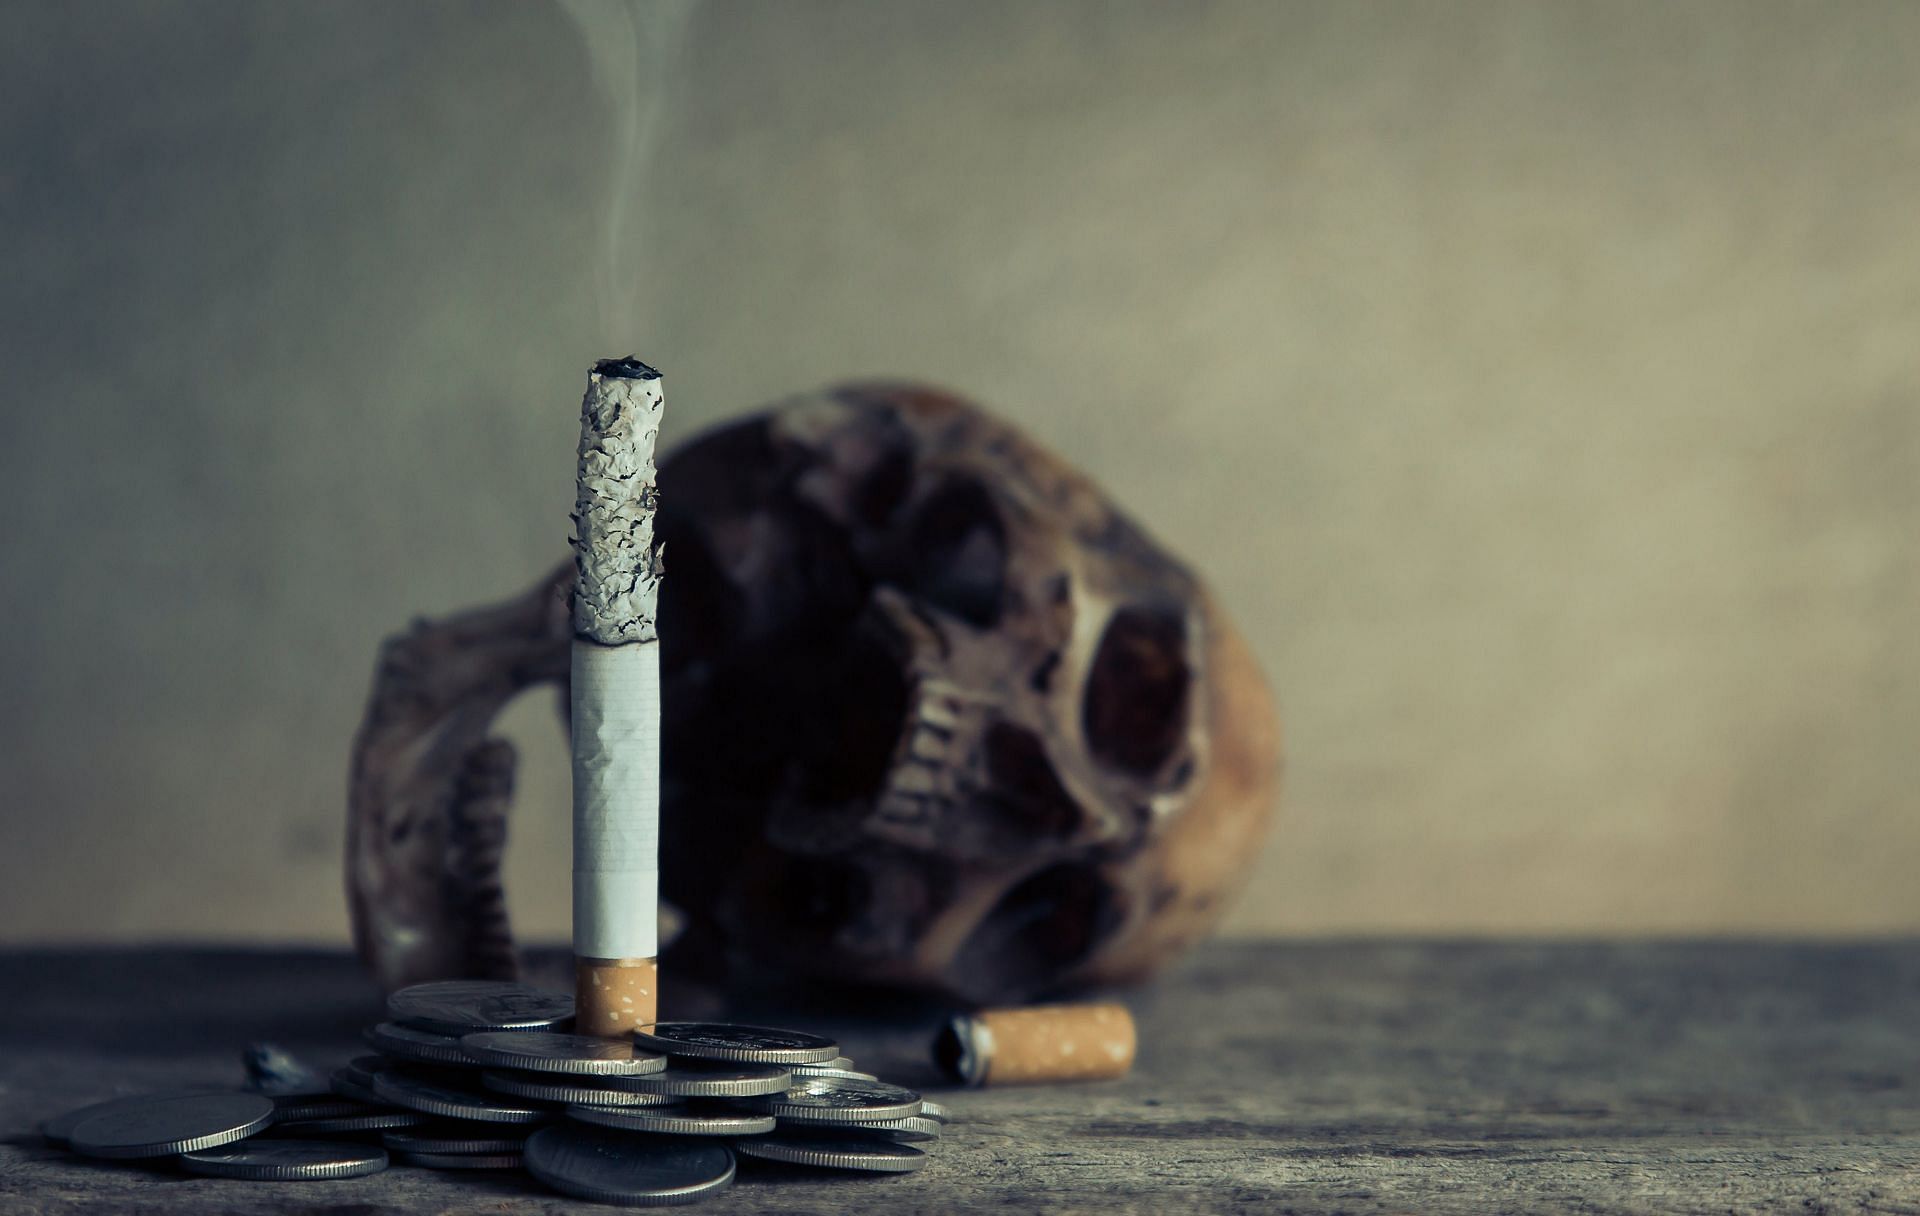 Smoking included in bad habits for health. (Image sourced via Pexels / Photo by aphiwat)